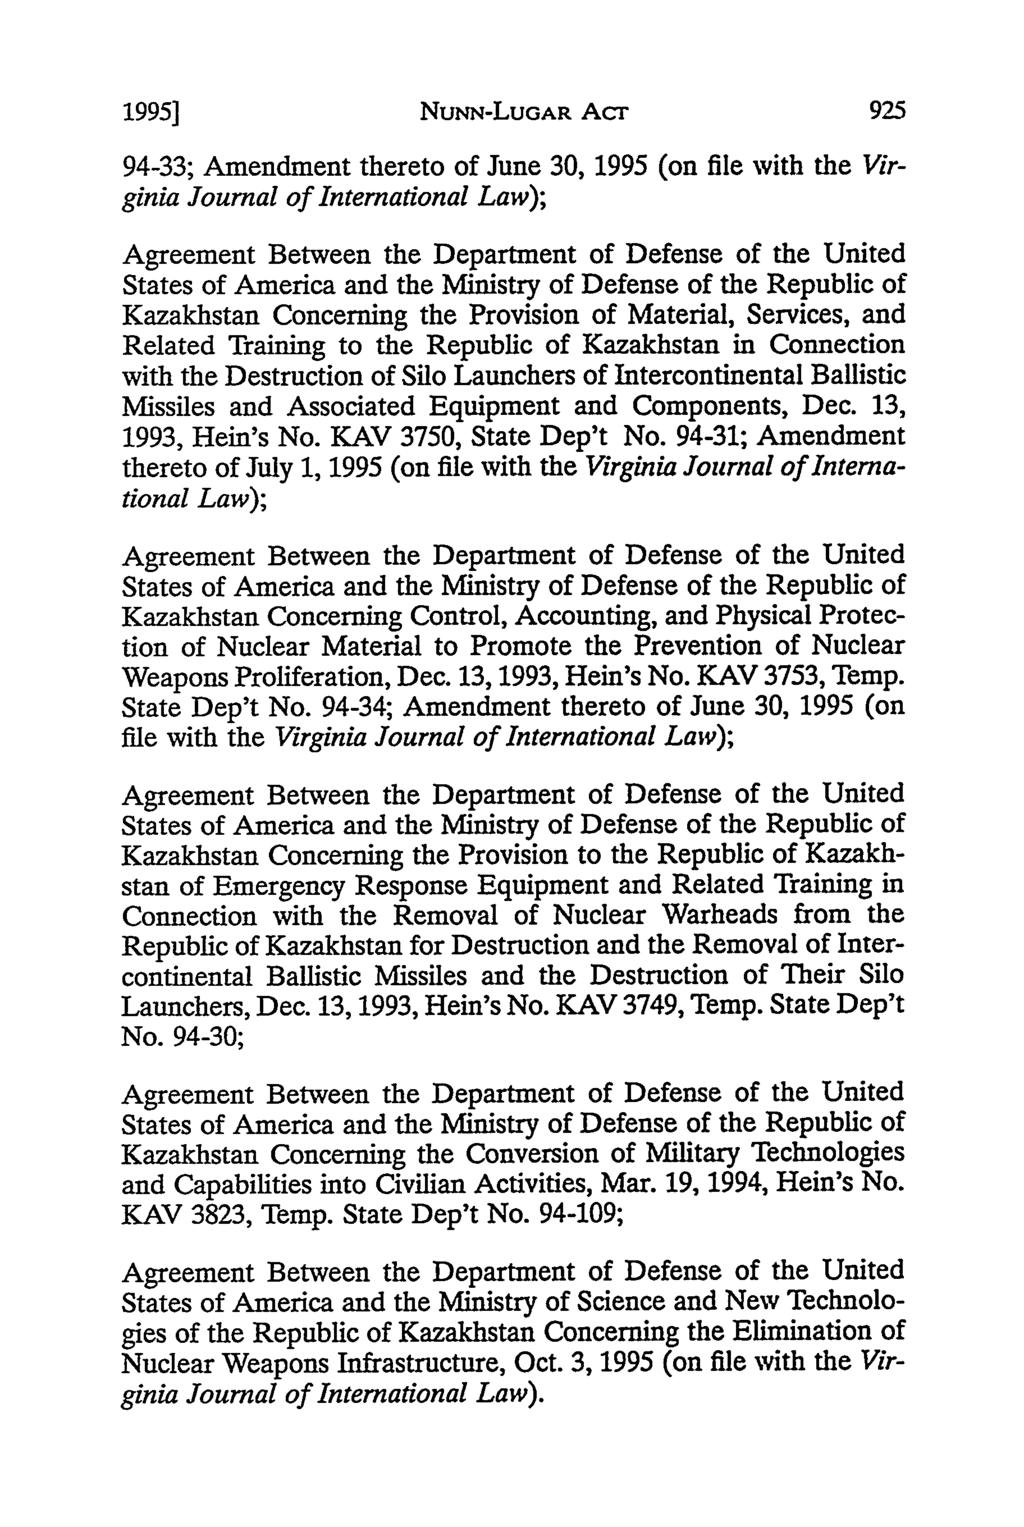 1995] NUNN-LUGAR ACT 94-33; Amendment thereto of June 30, 1995 (on file with the Virginia Journal of International Law); States of America and the Ministry of Defense of the Republic of Kazakhstan